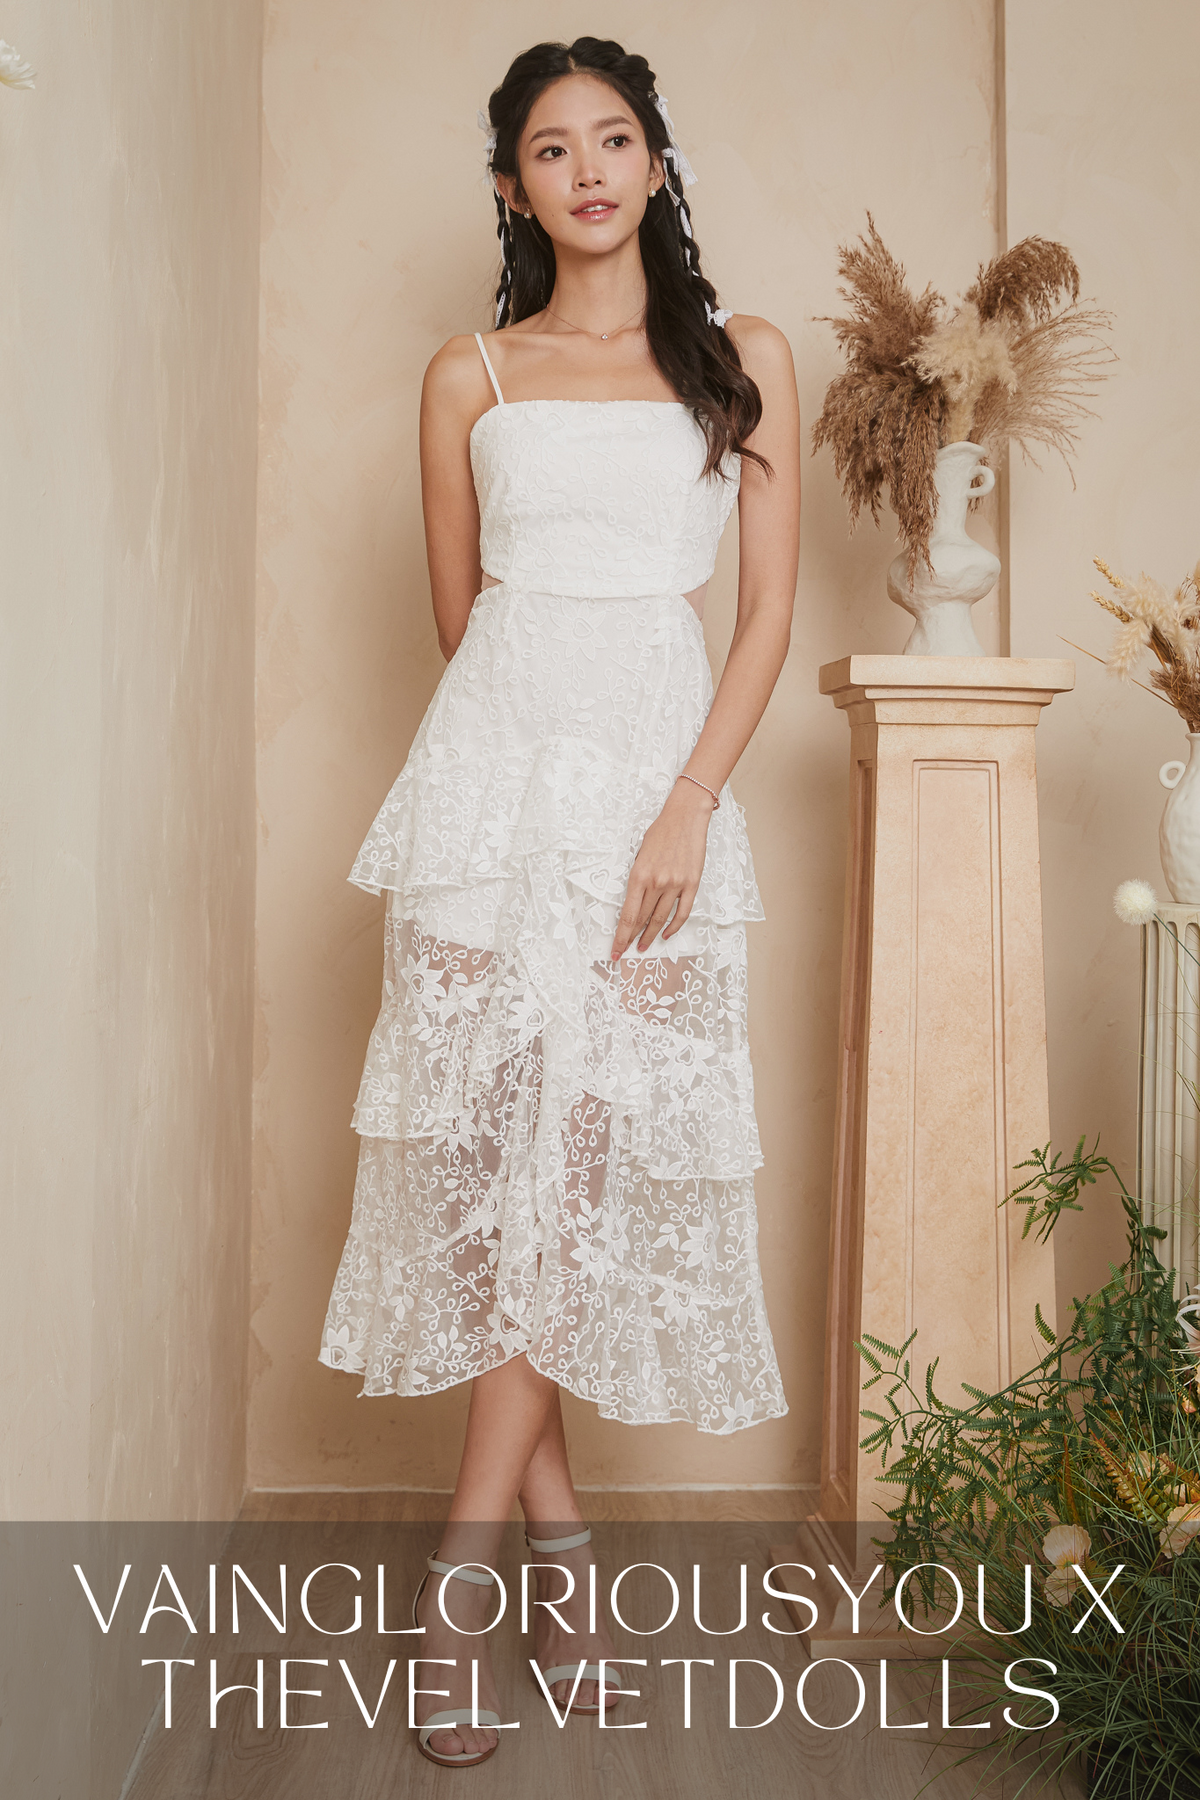 Backorder* [VGY] Lace Embroidery Tier Dress in White